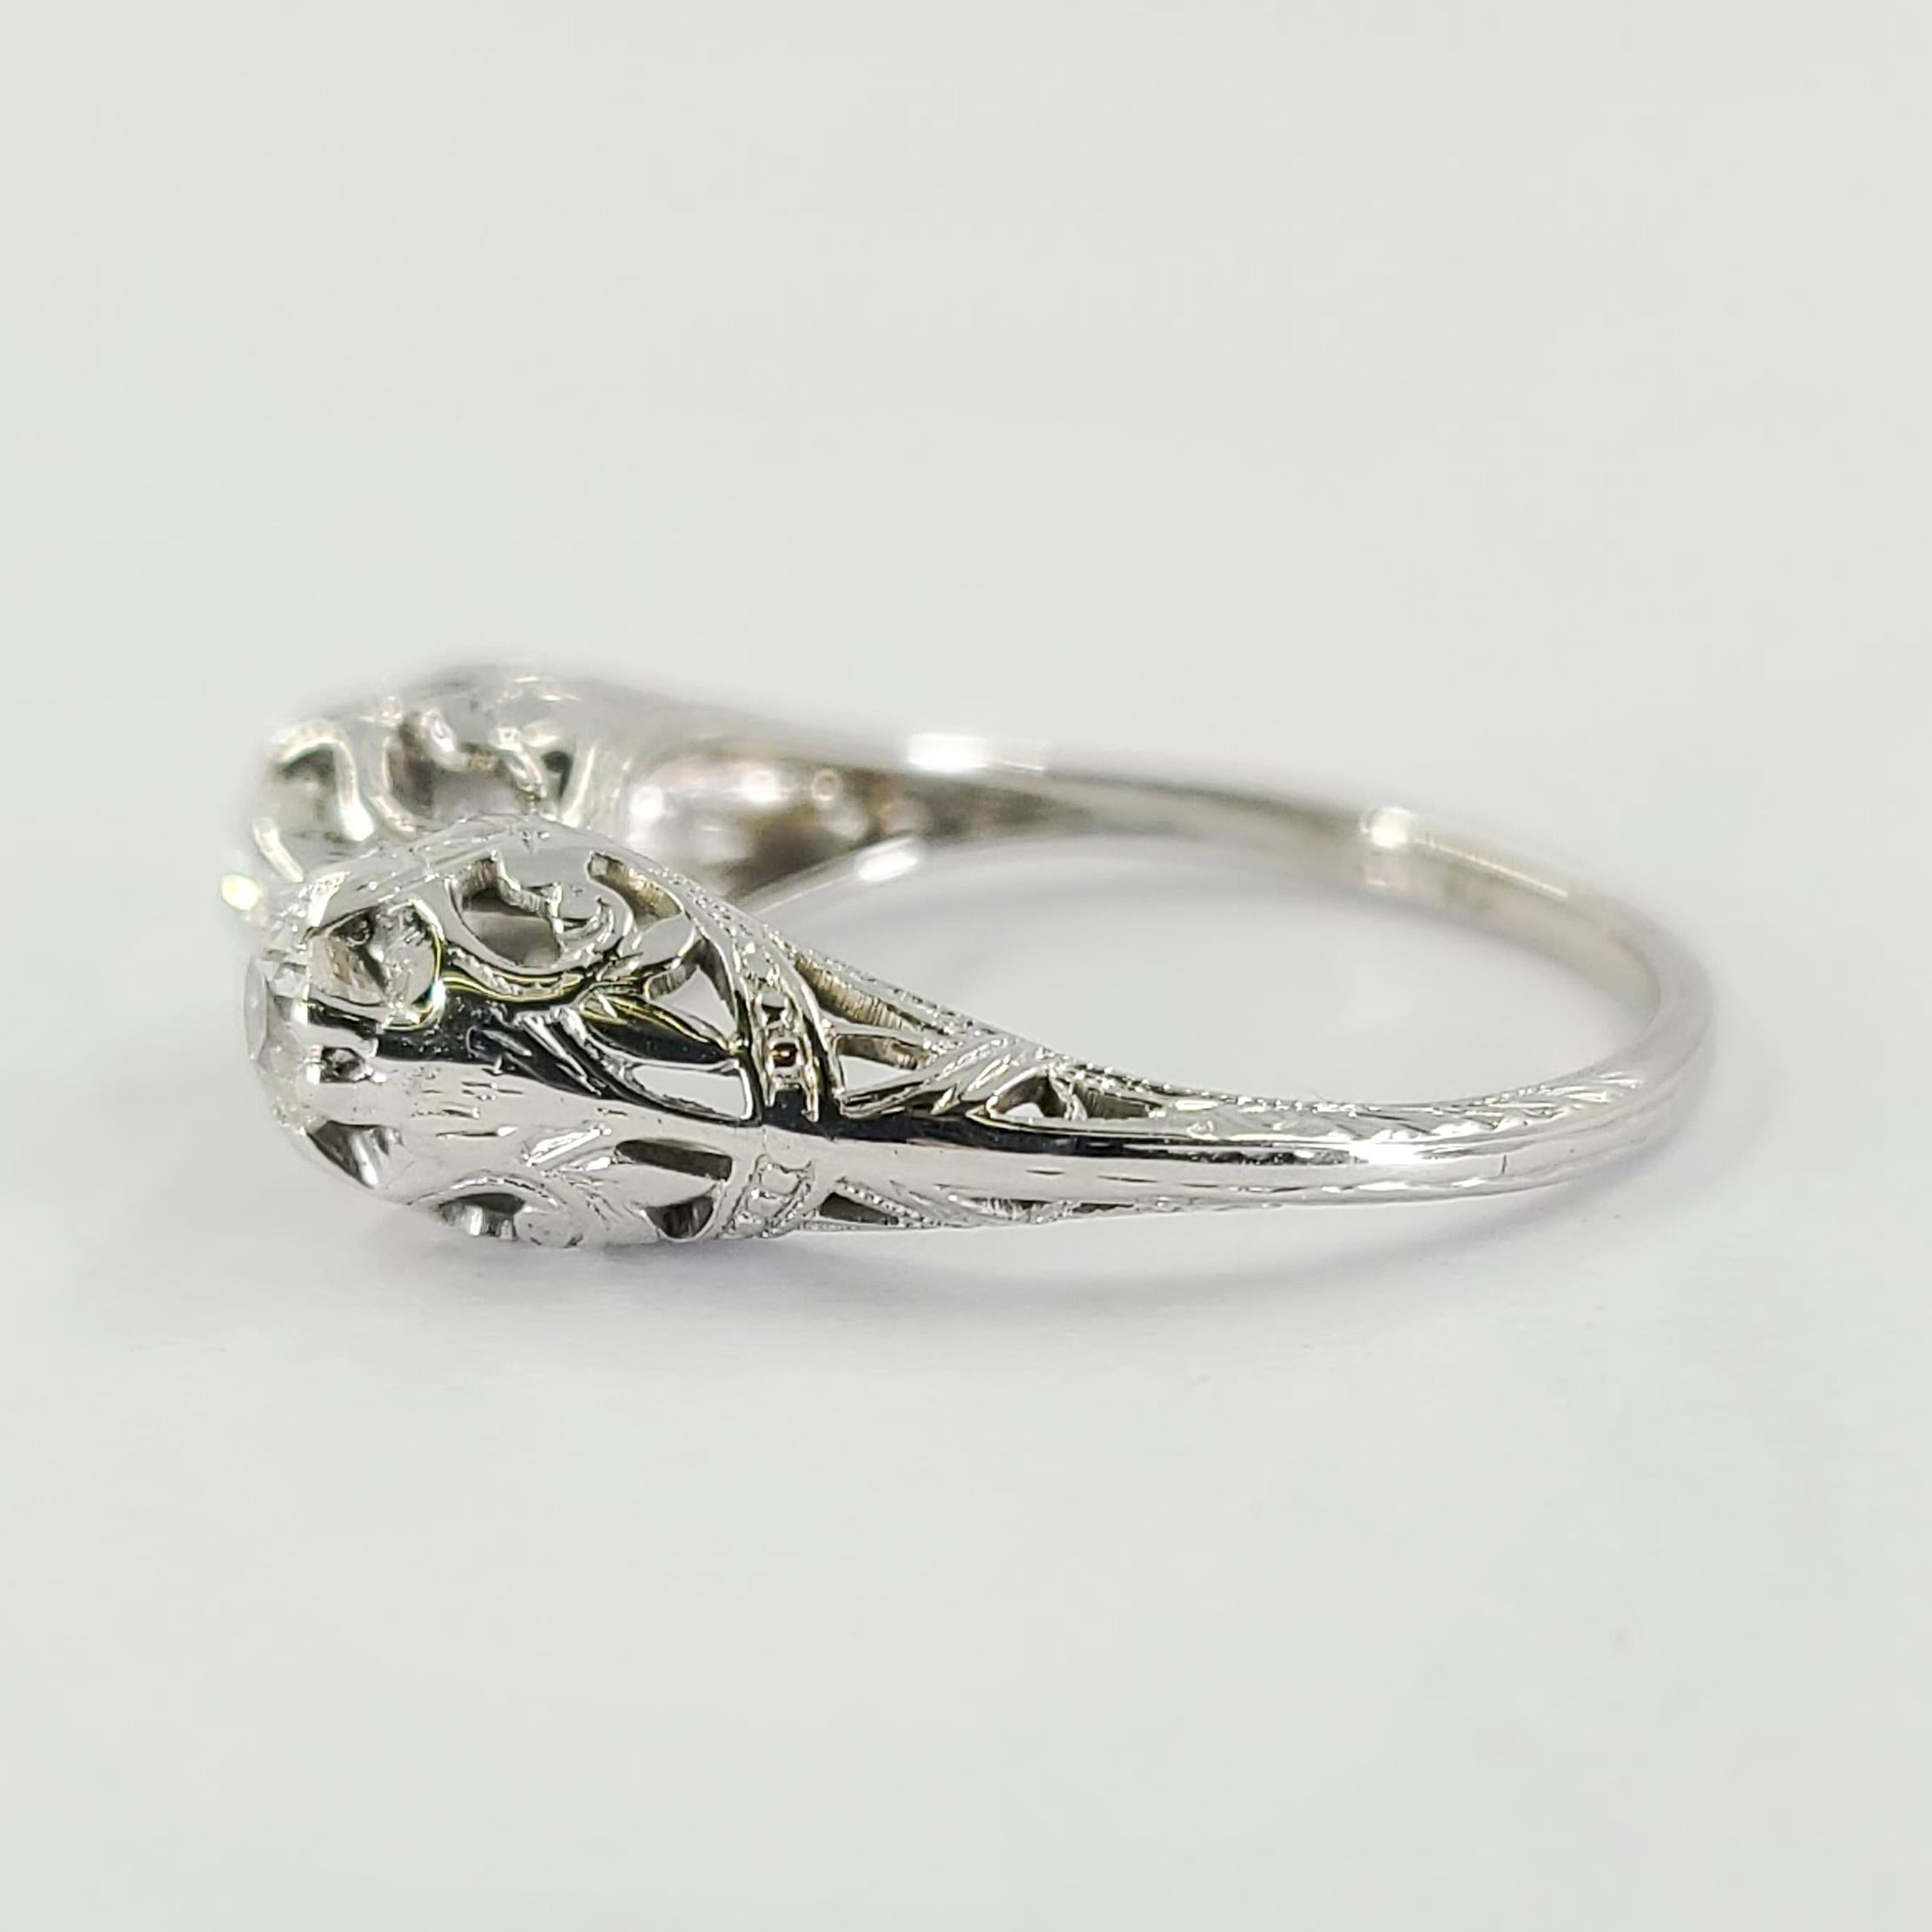 Antique White Gold Old Mine Cut Diamond Ring In Good Condition For Sale In Coral Gables, FL